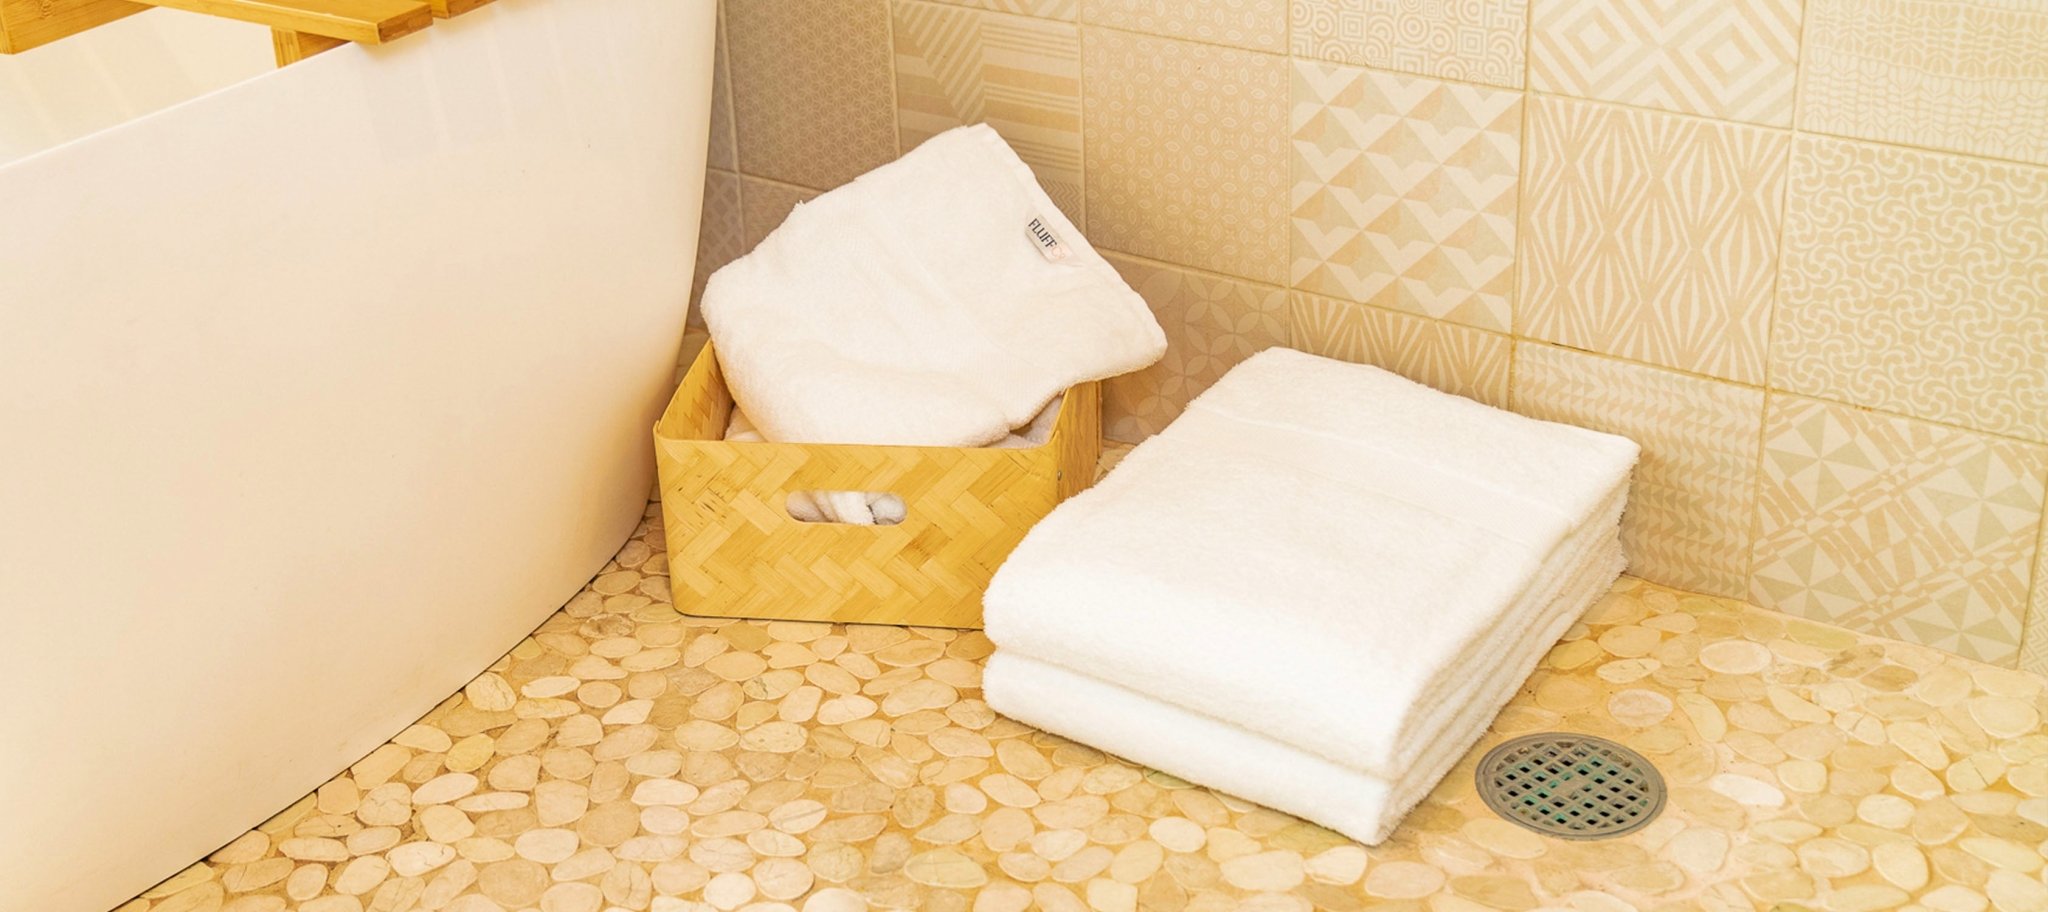 5 tips for selecting the best towels for hotels - Hotel supplies by  Hotels4Humanity